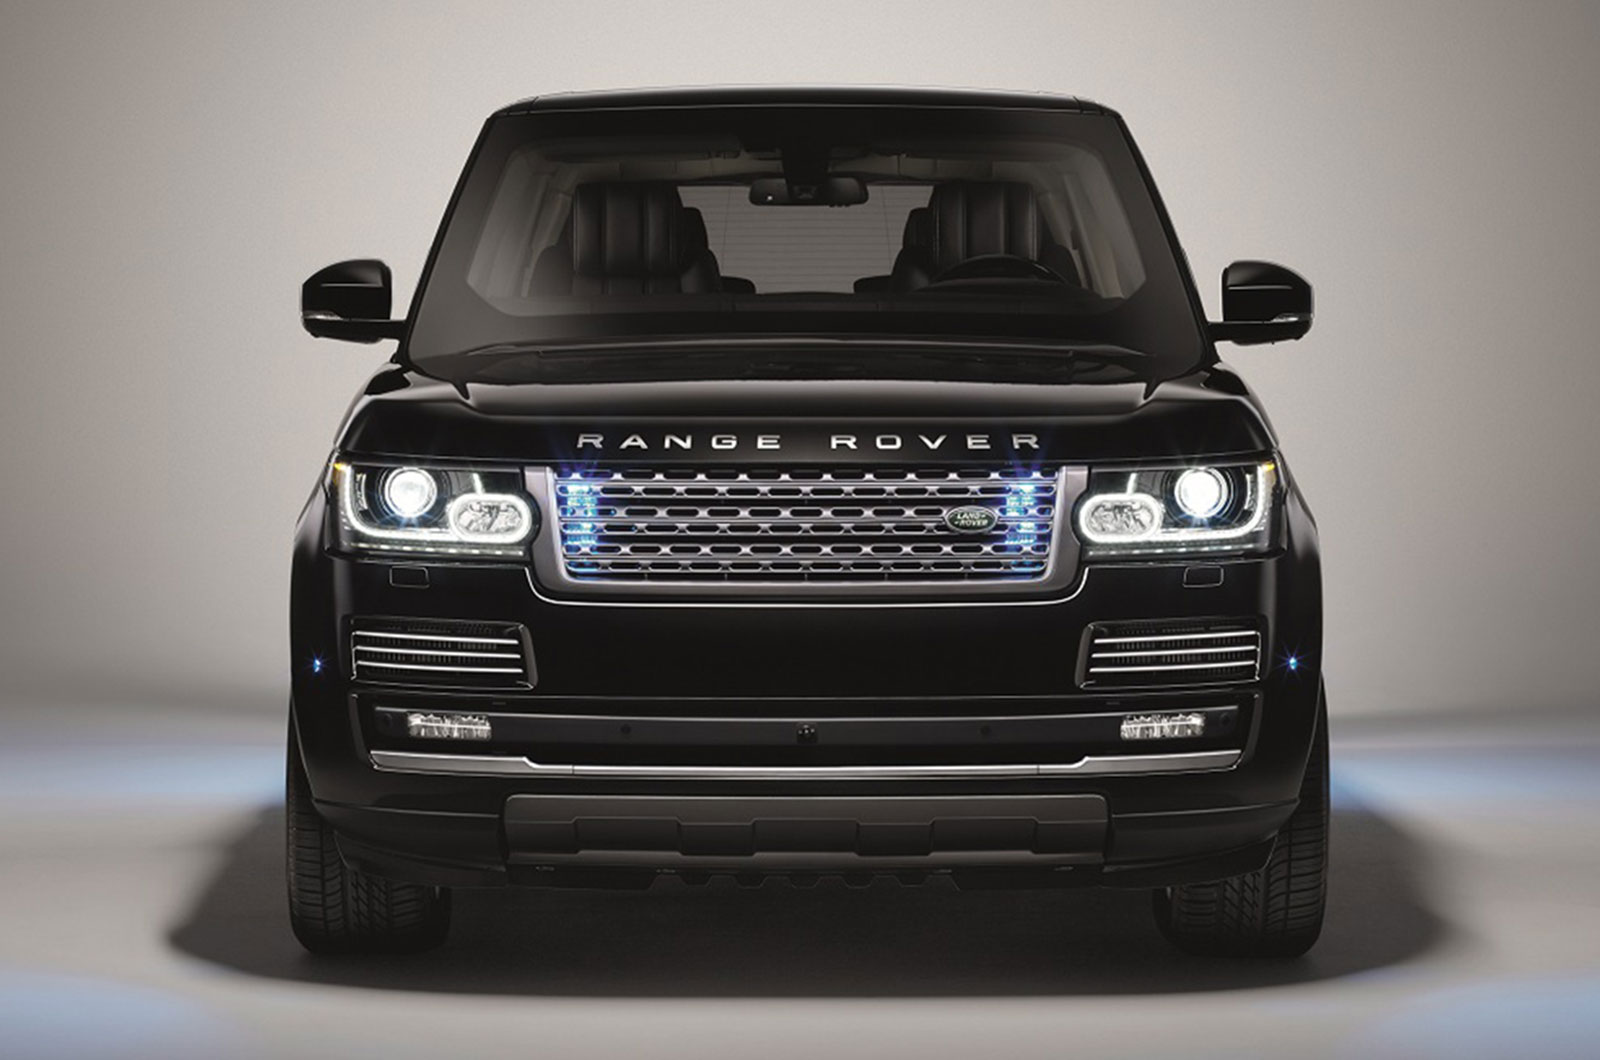 2015 Range Rover Sentinel - prices, specs and pictures ...